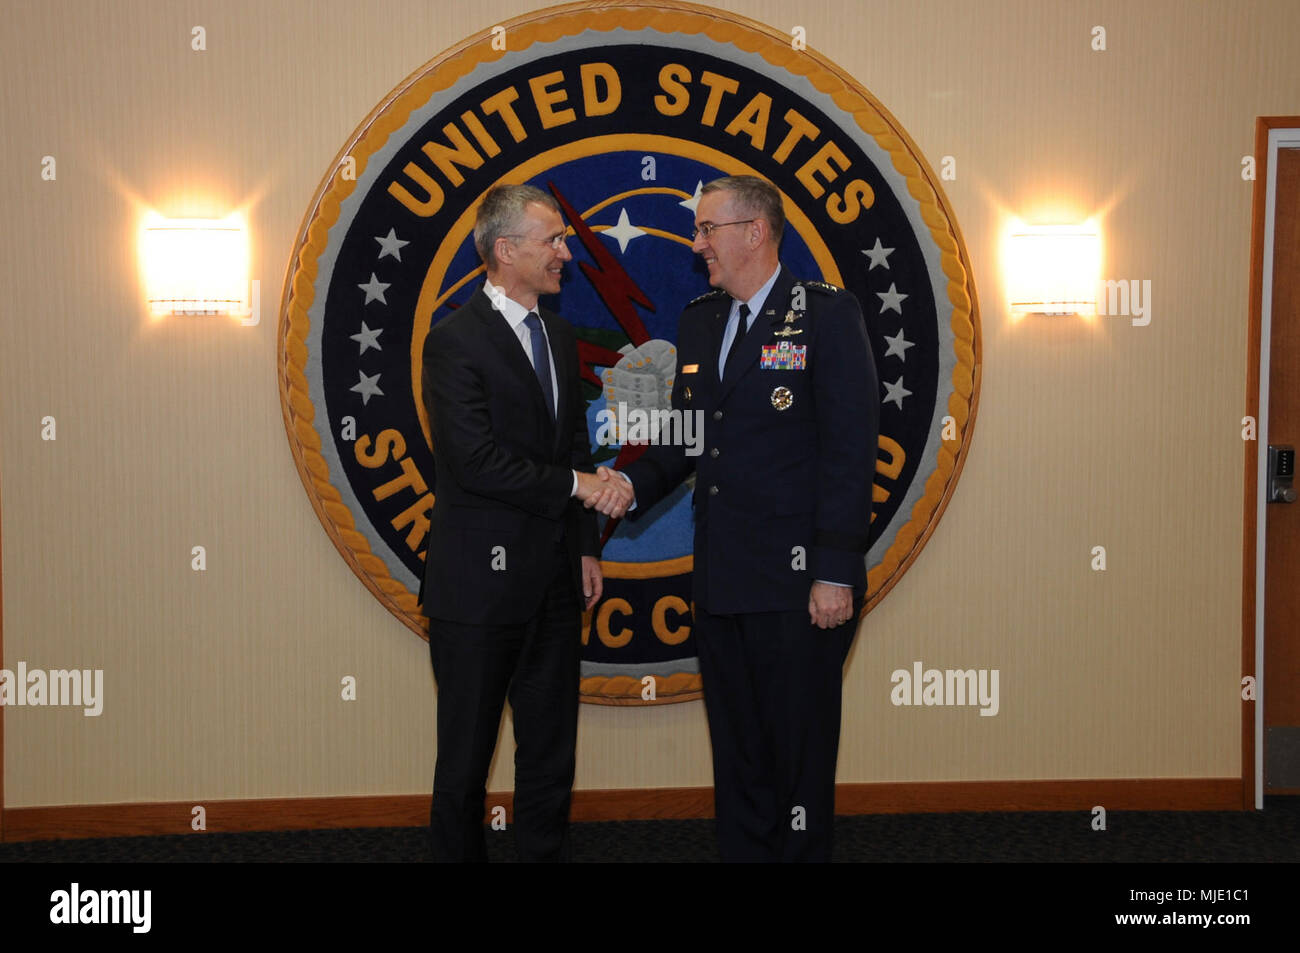 U.S. Air Force Gen. John Hyten, commander of U.S. Strategic Command (USSTRATCOM), welcomes NATO Secretary General Jens Stoltenberg to USSTRATCOM headquarters at Offutt Air Force Base, Neb., April 6, 2018. During his visit, Stoltenberg toured the command’s global operations center and participated in discussions with Hyten, other senior leaders and subject matter experts on the continuing U.S. commitment to supporting NATO and allies. (USSTRATCOM Stock Photo